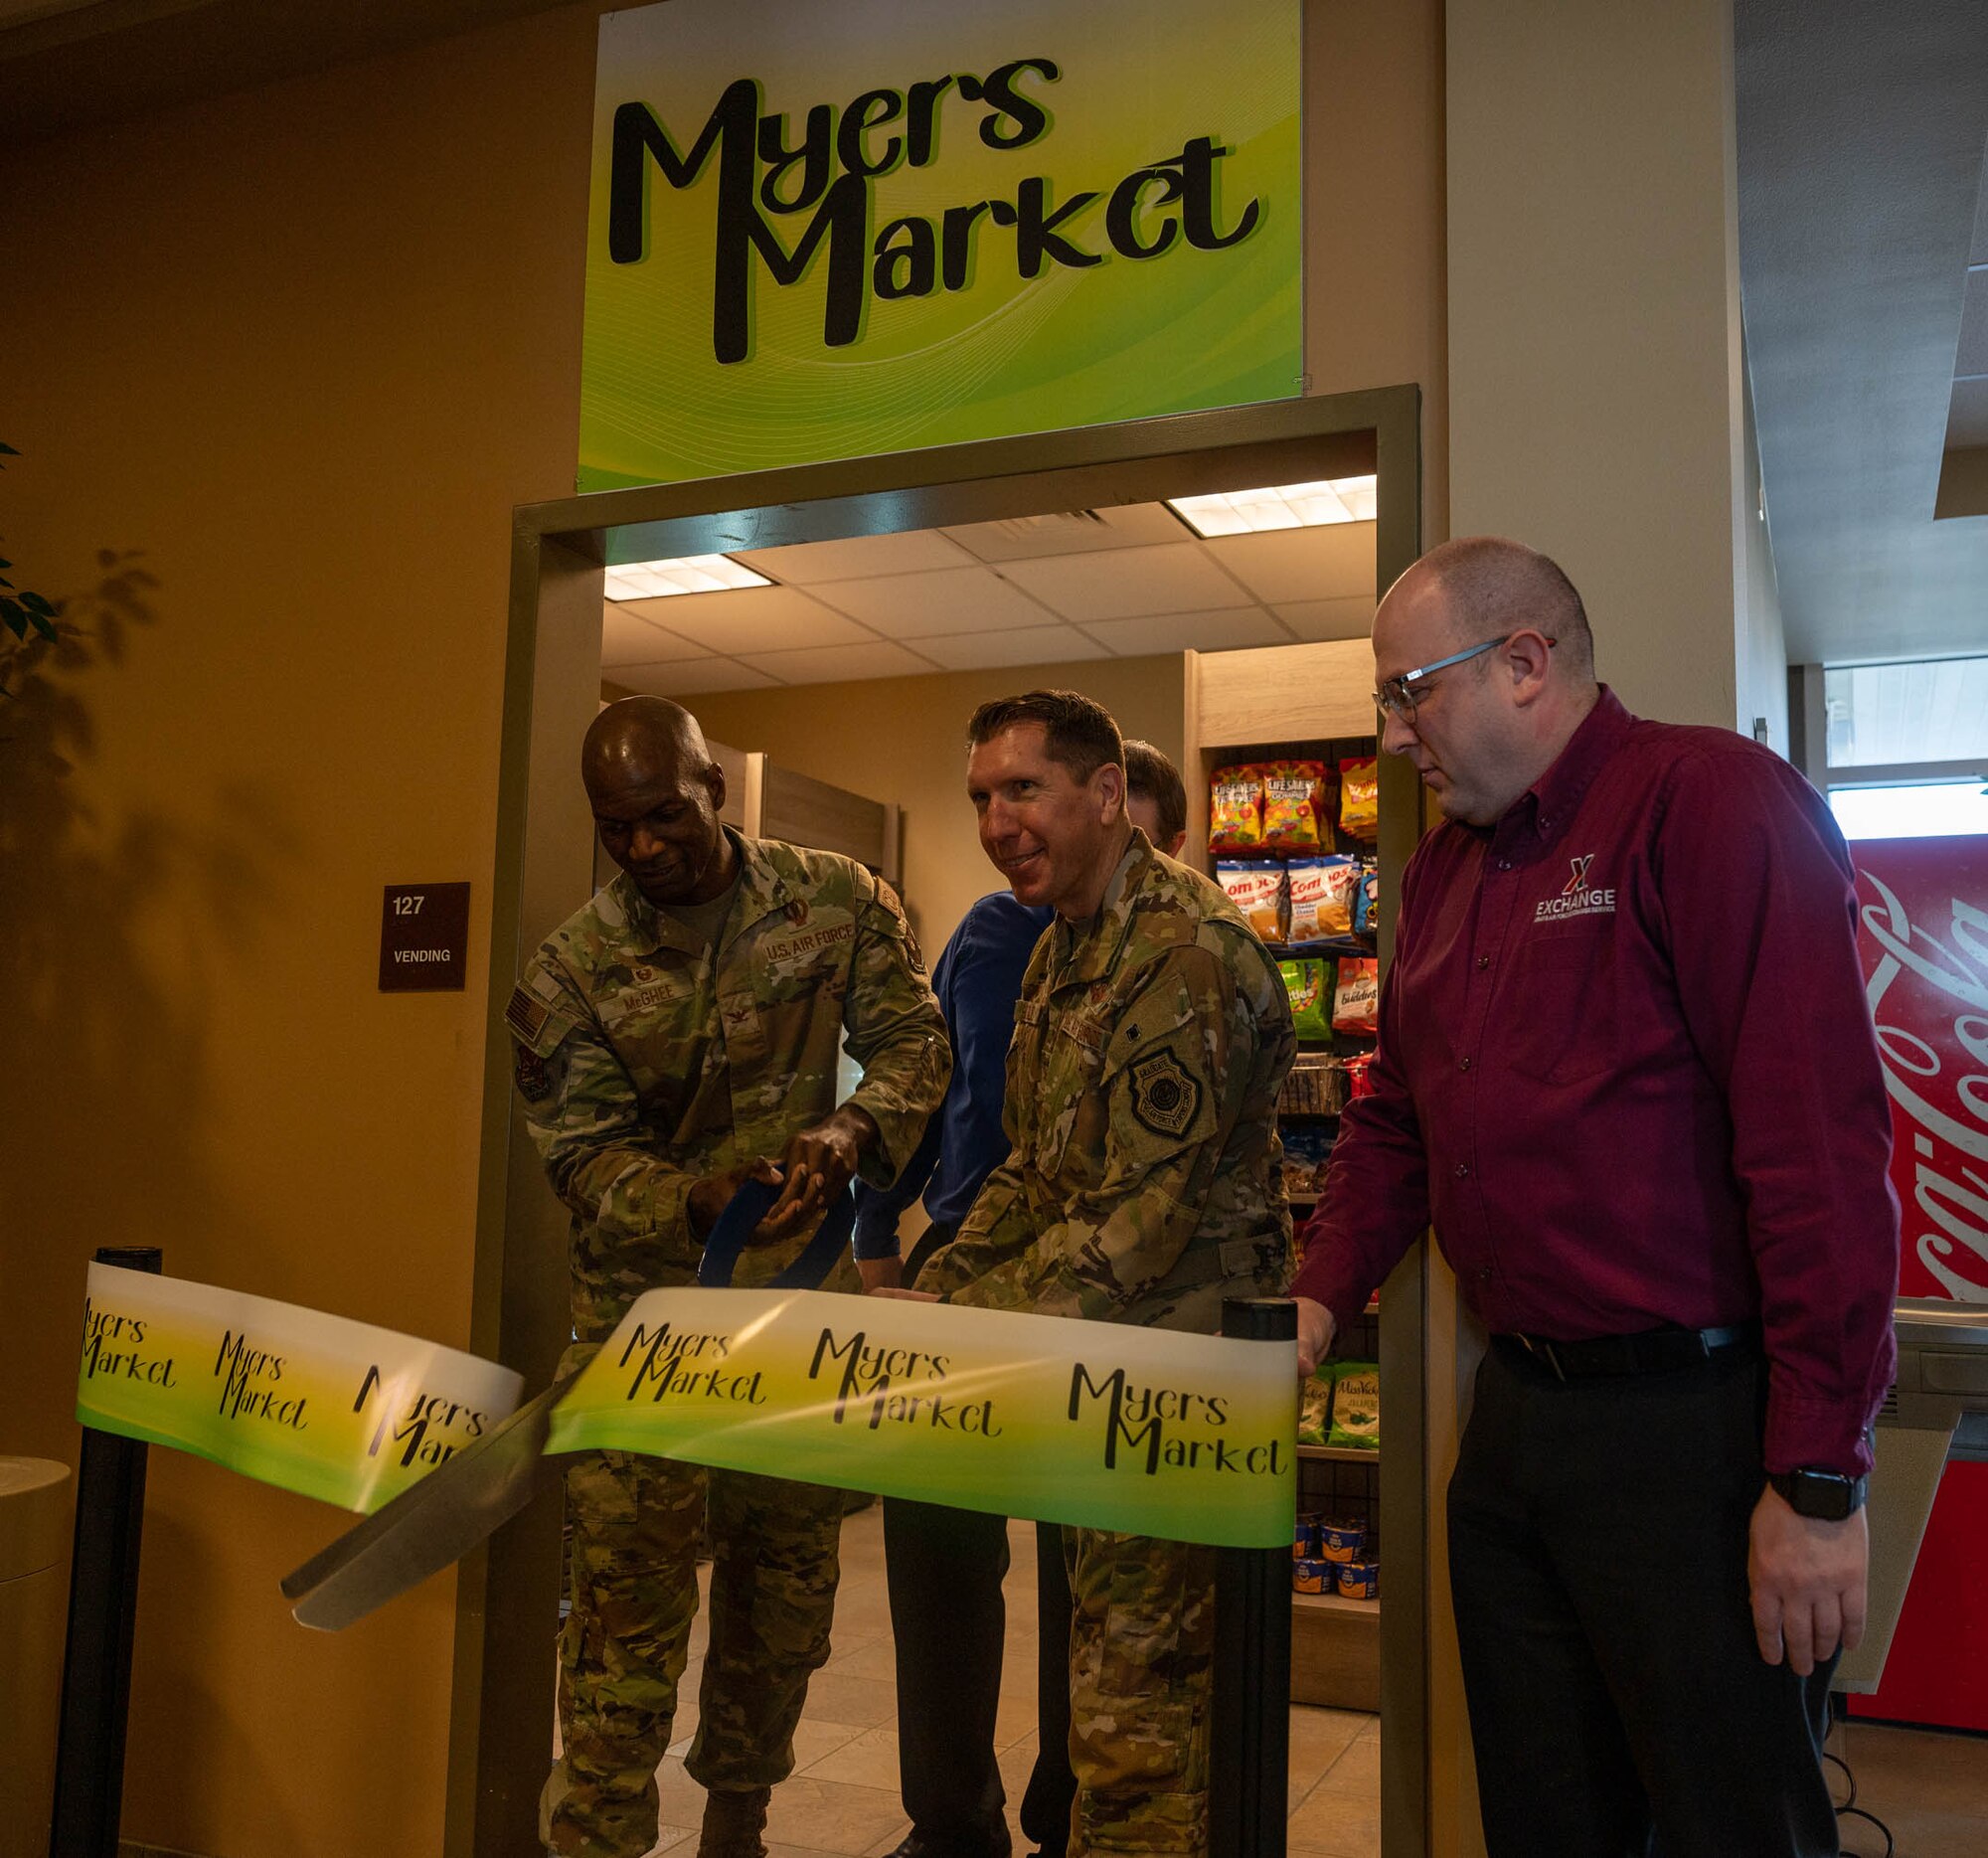 U.S. Air Force Col. Daniel Hoadley, 5th Bomb Wing commander (right), and U.S. Air Force Col. Kenneth Mcghee, 91st Missile Wing commander cut the ribbon at the grand opening of Myers Market at Minot Air Force Base, North Dakota, Nov. 15, 2023. Myers Market gives Airmen living in the dorms access to more food and beverage options. It also aids Airmen during winter months when traveling elsewhere for food could be inconvenient. (U.S. Air Force photo by Airman 1st Class Luis Gomez)